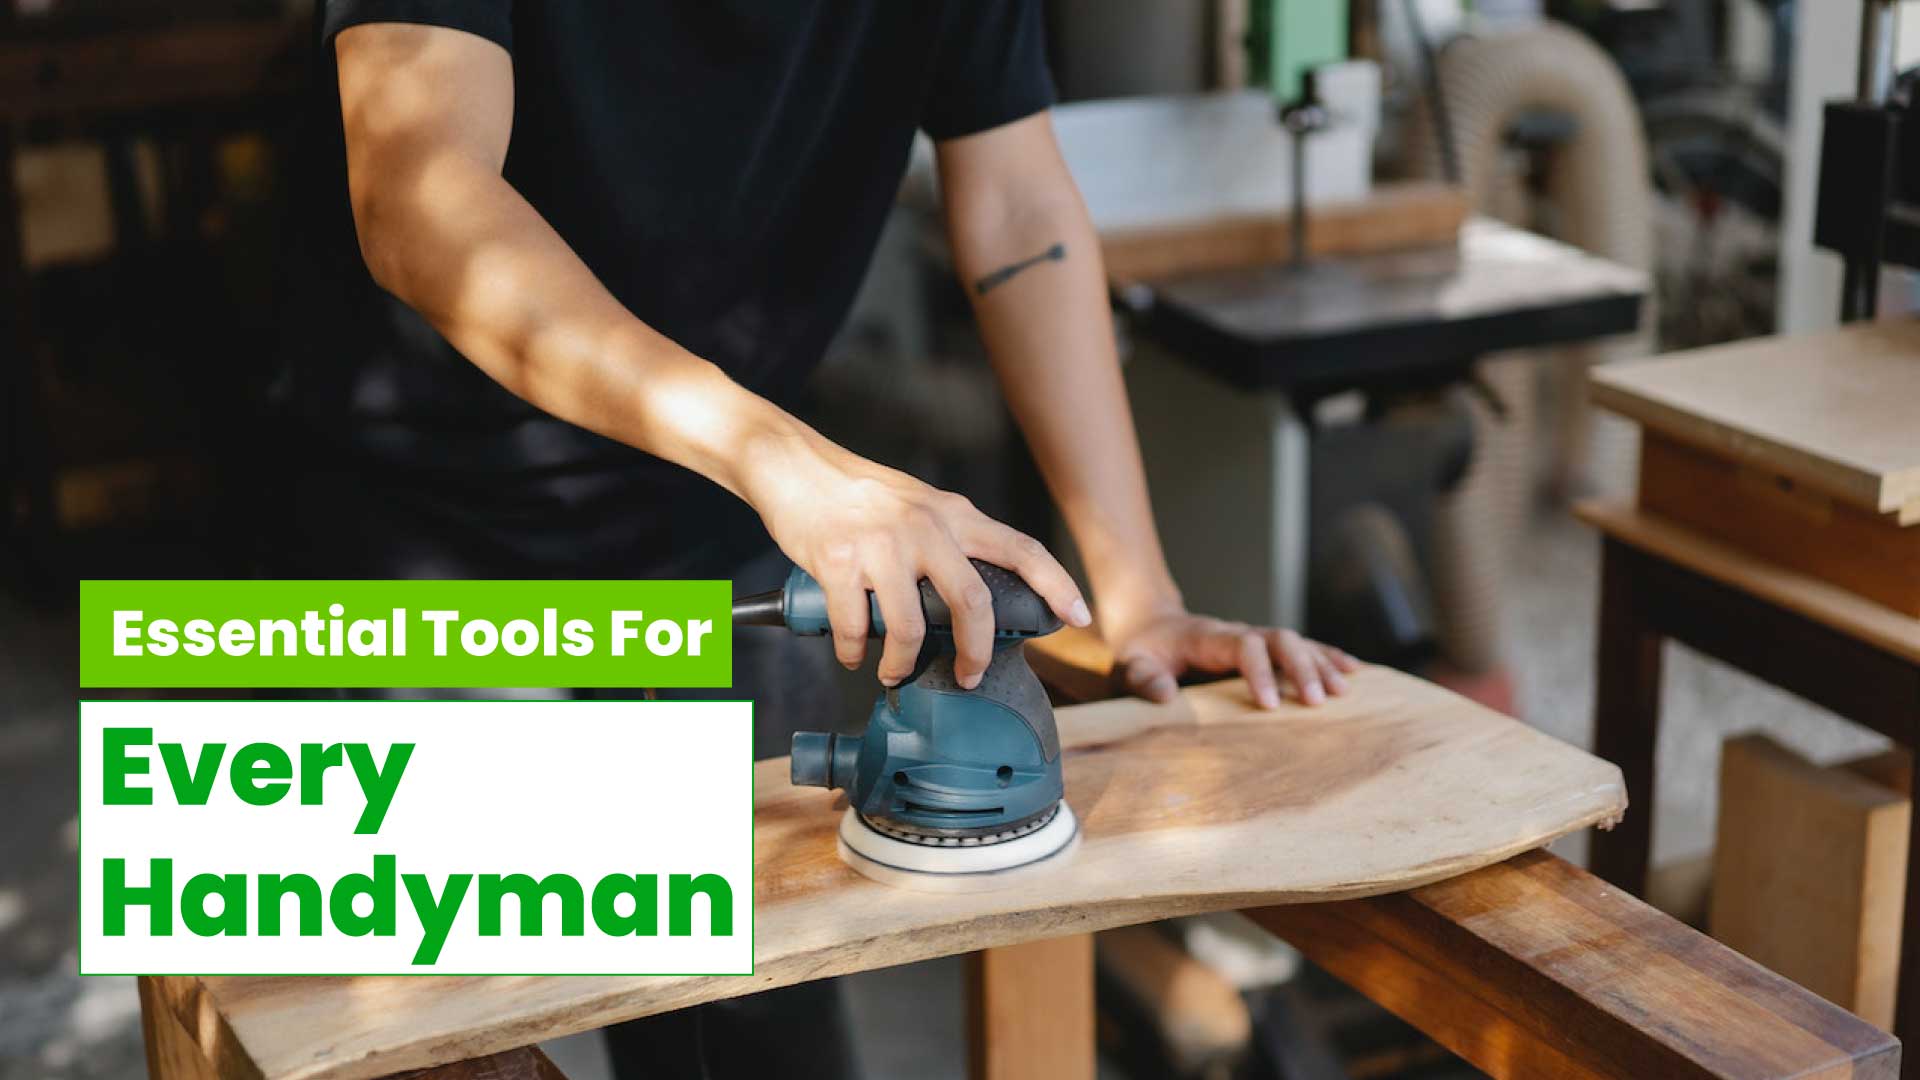 The Essential Tools for Every Handyman